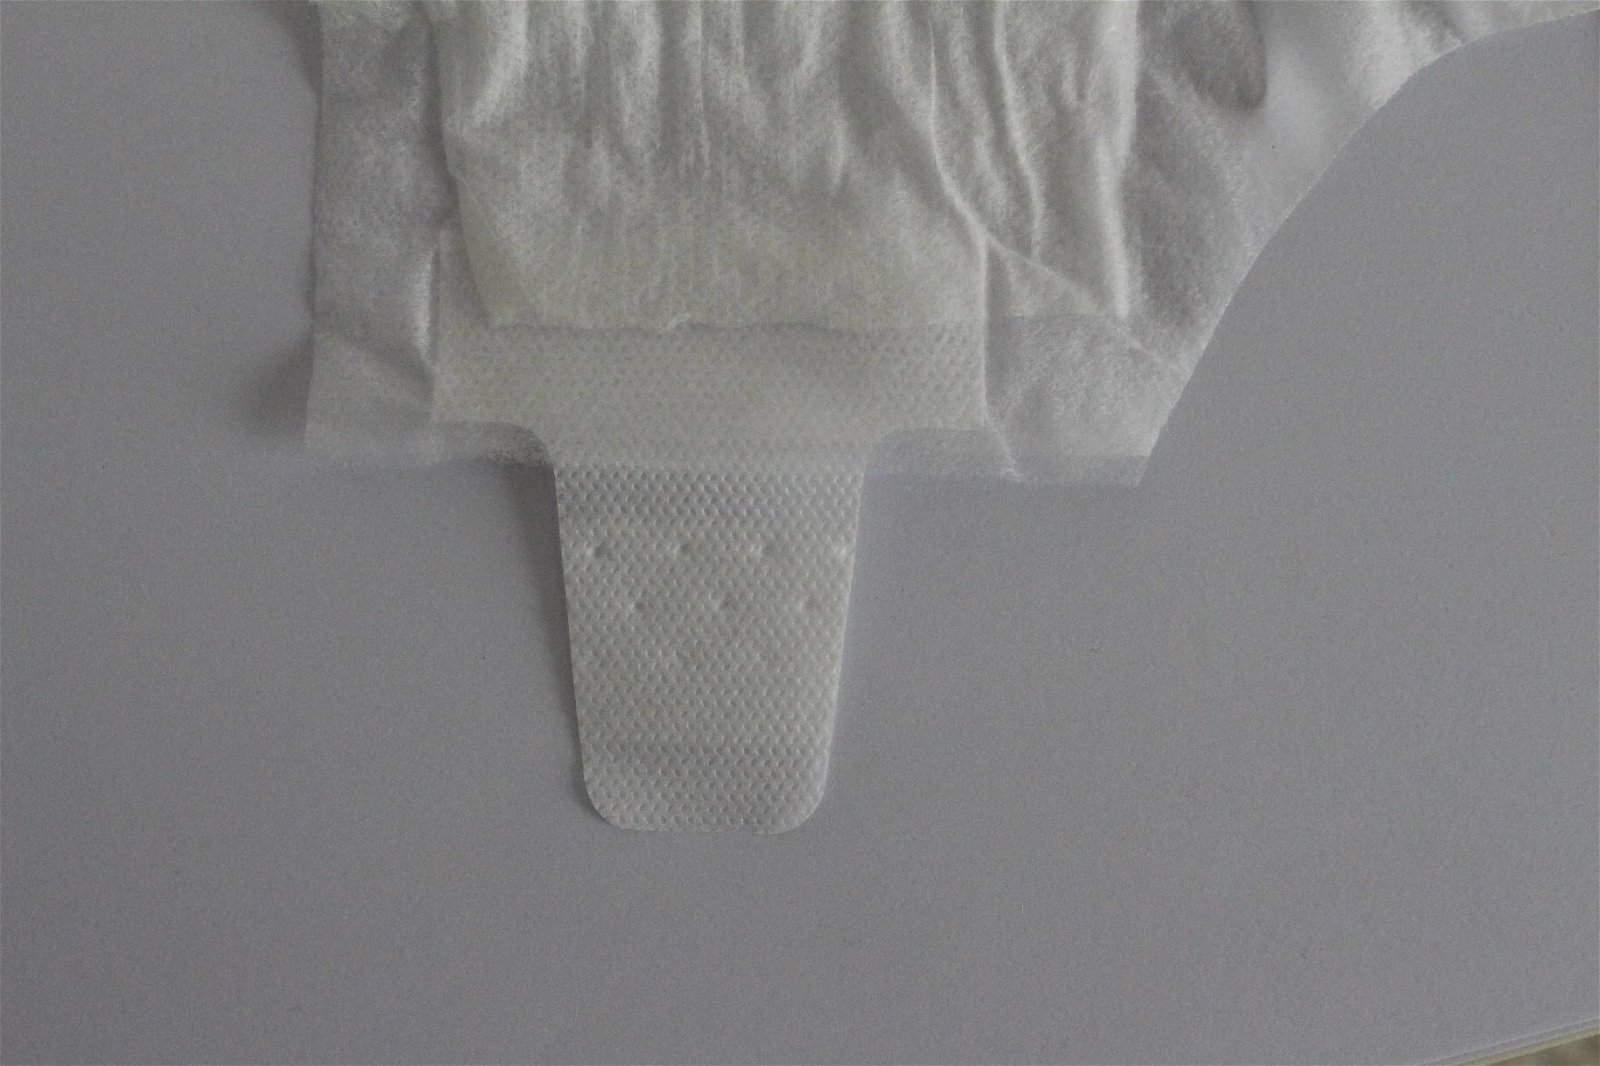 Cheap disponsable Baby Diaper Free Sample sent on request 5